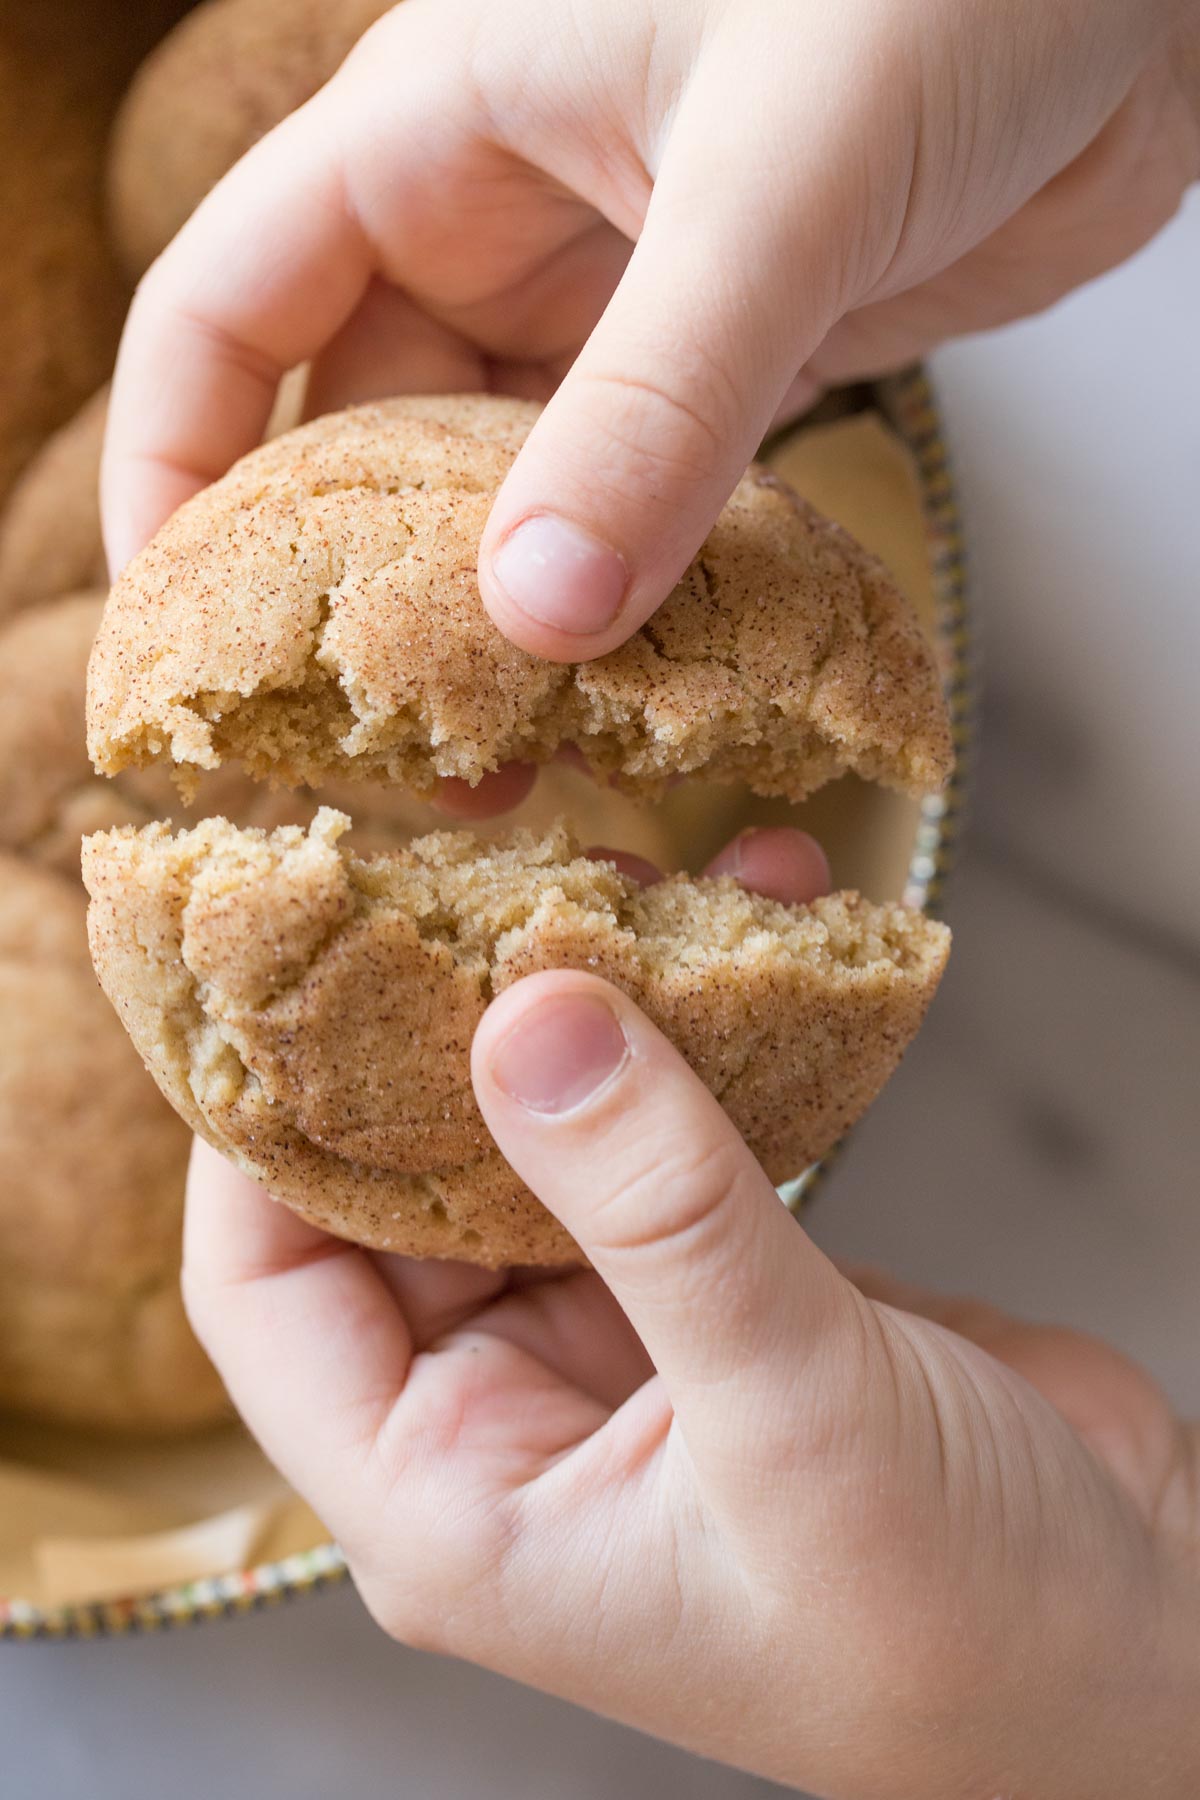 A child's hand breaking open a Super Soft Snickerdoodle. 